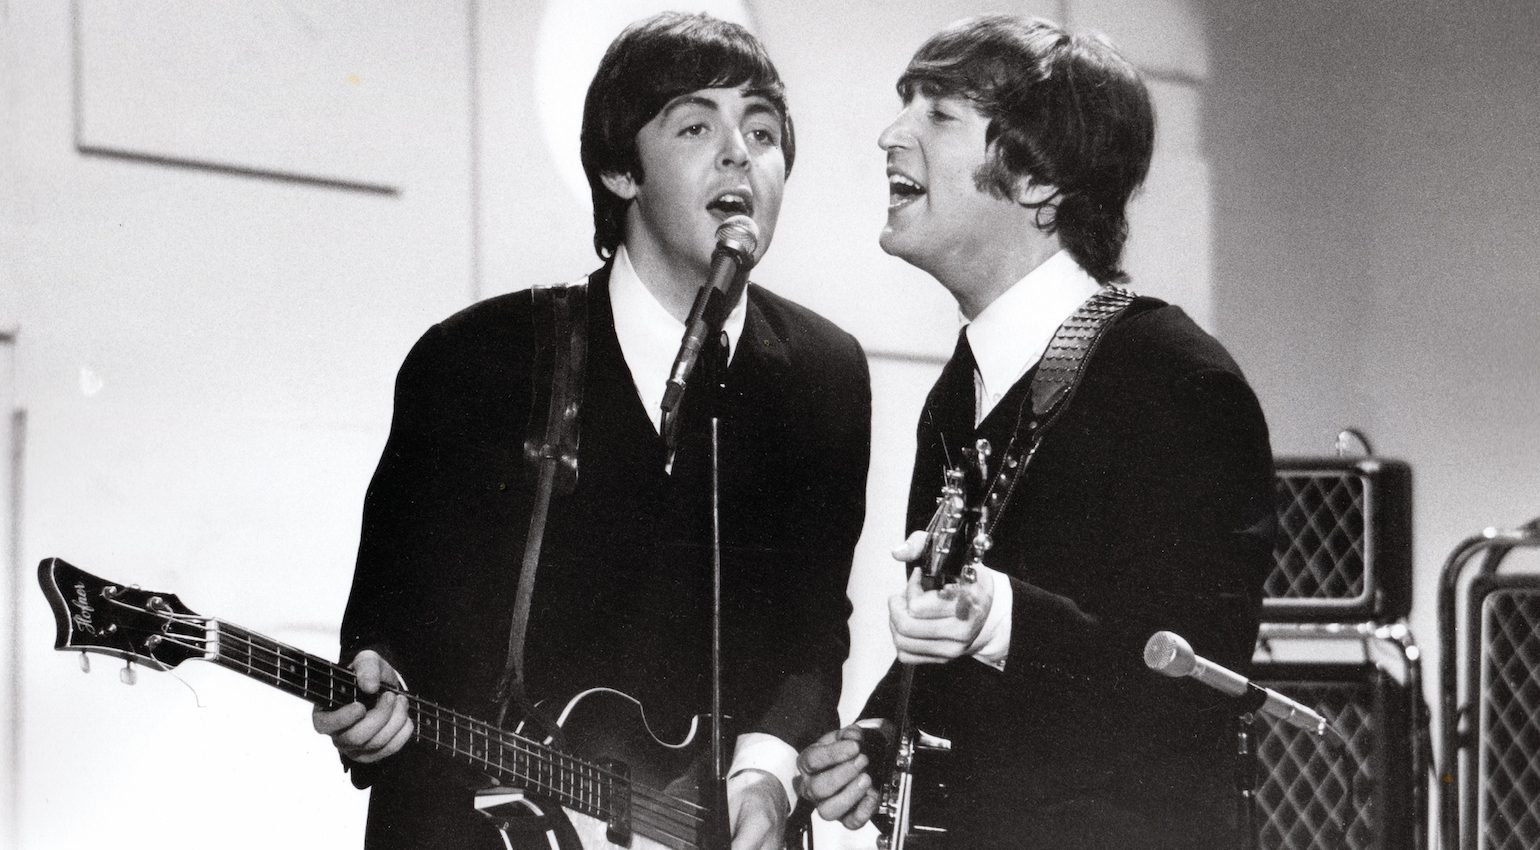 Paul McCartney, left, and John Lennon, right, perform on CBS' "Toast of the Town" in a performance that aired on Sept. 12, 1965.CBS Photo Archive / Getty ImagesPaul McCartney, left, and John Lennon, right, perform on CBS' "Toast of the Town" in a performance that aired on Sept. 12, 1965.